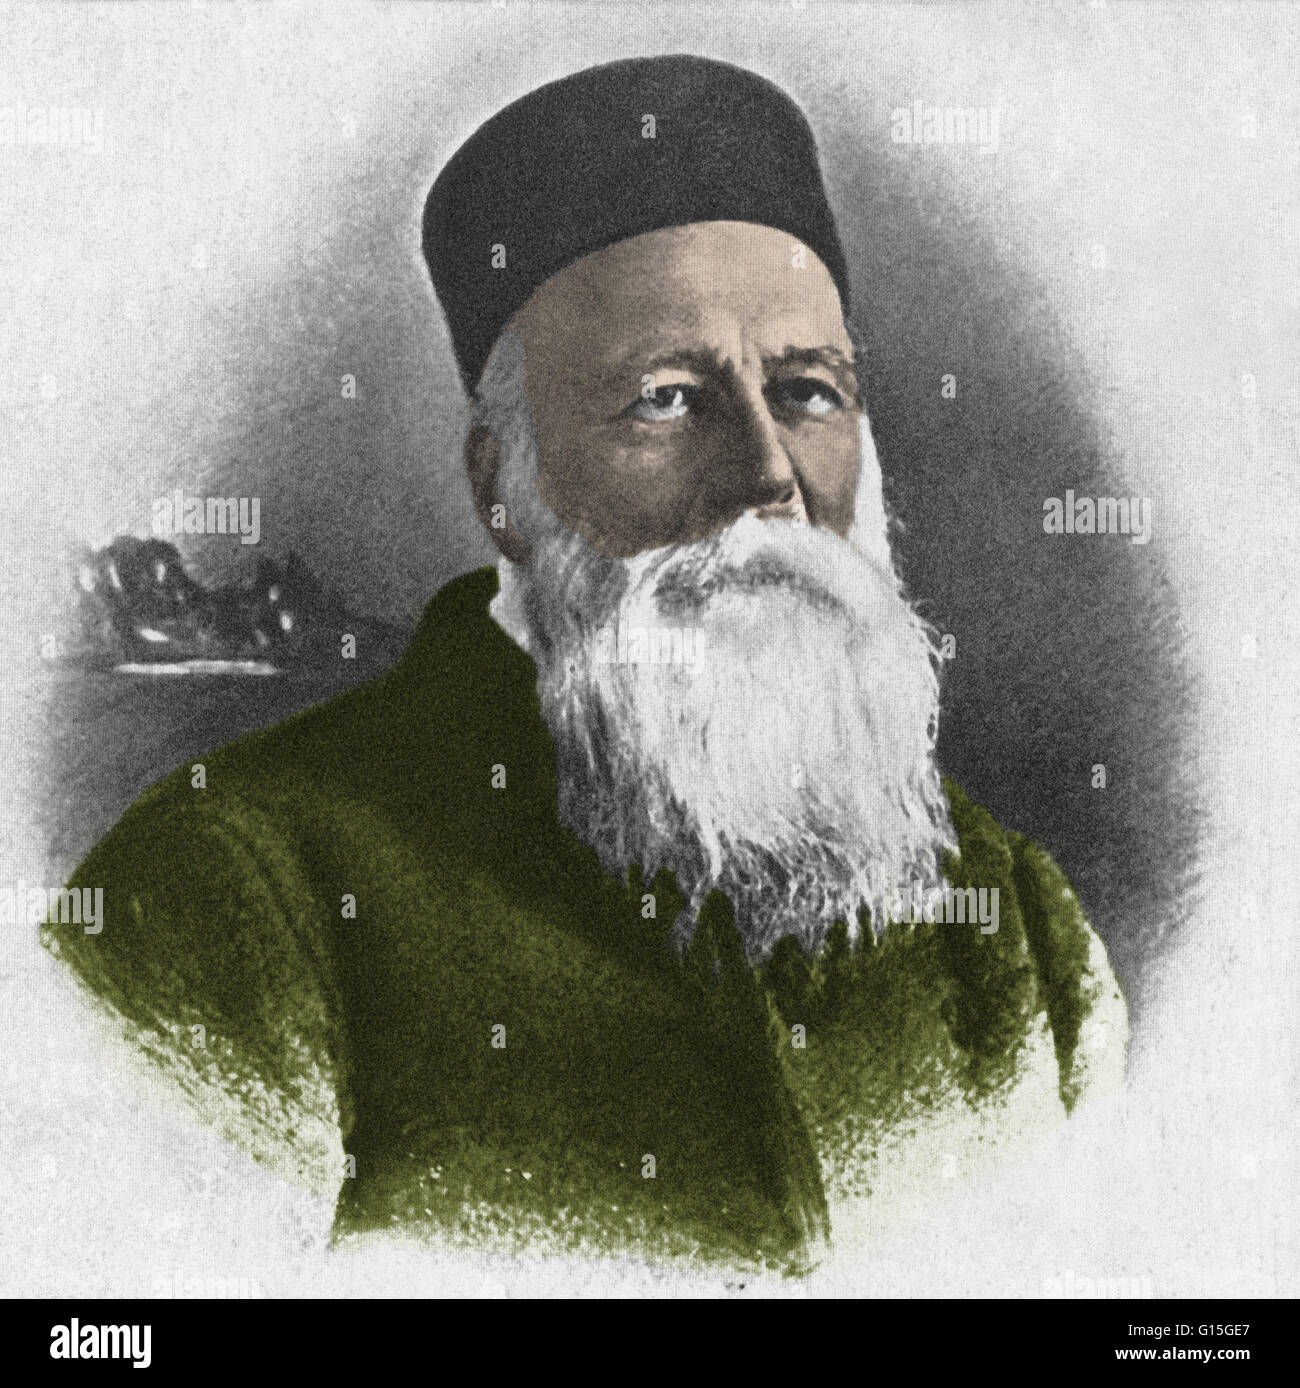 Jean Henri Dunant (1828-1910) was a Swiss businessman, social activist and humanitarian. During a business trip in 1859, he was witness to the aftermath of the Battle of Solferino in modern day Italy. He recorded his memories and experiences in the book A Stock Photo